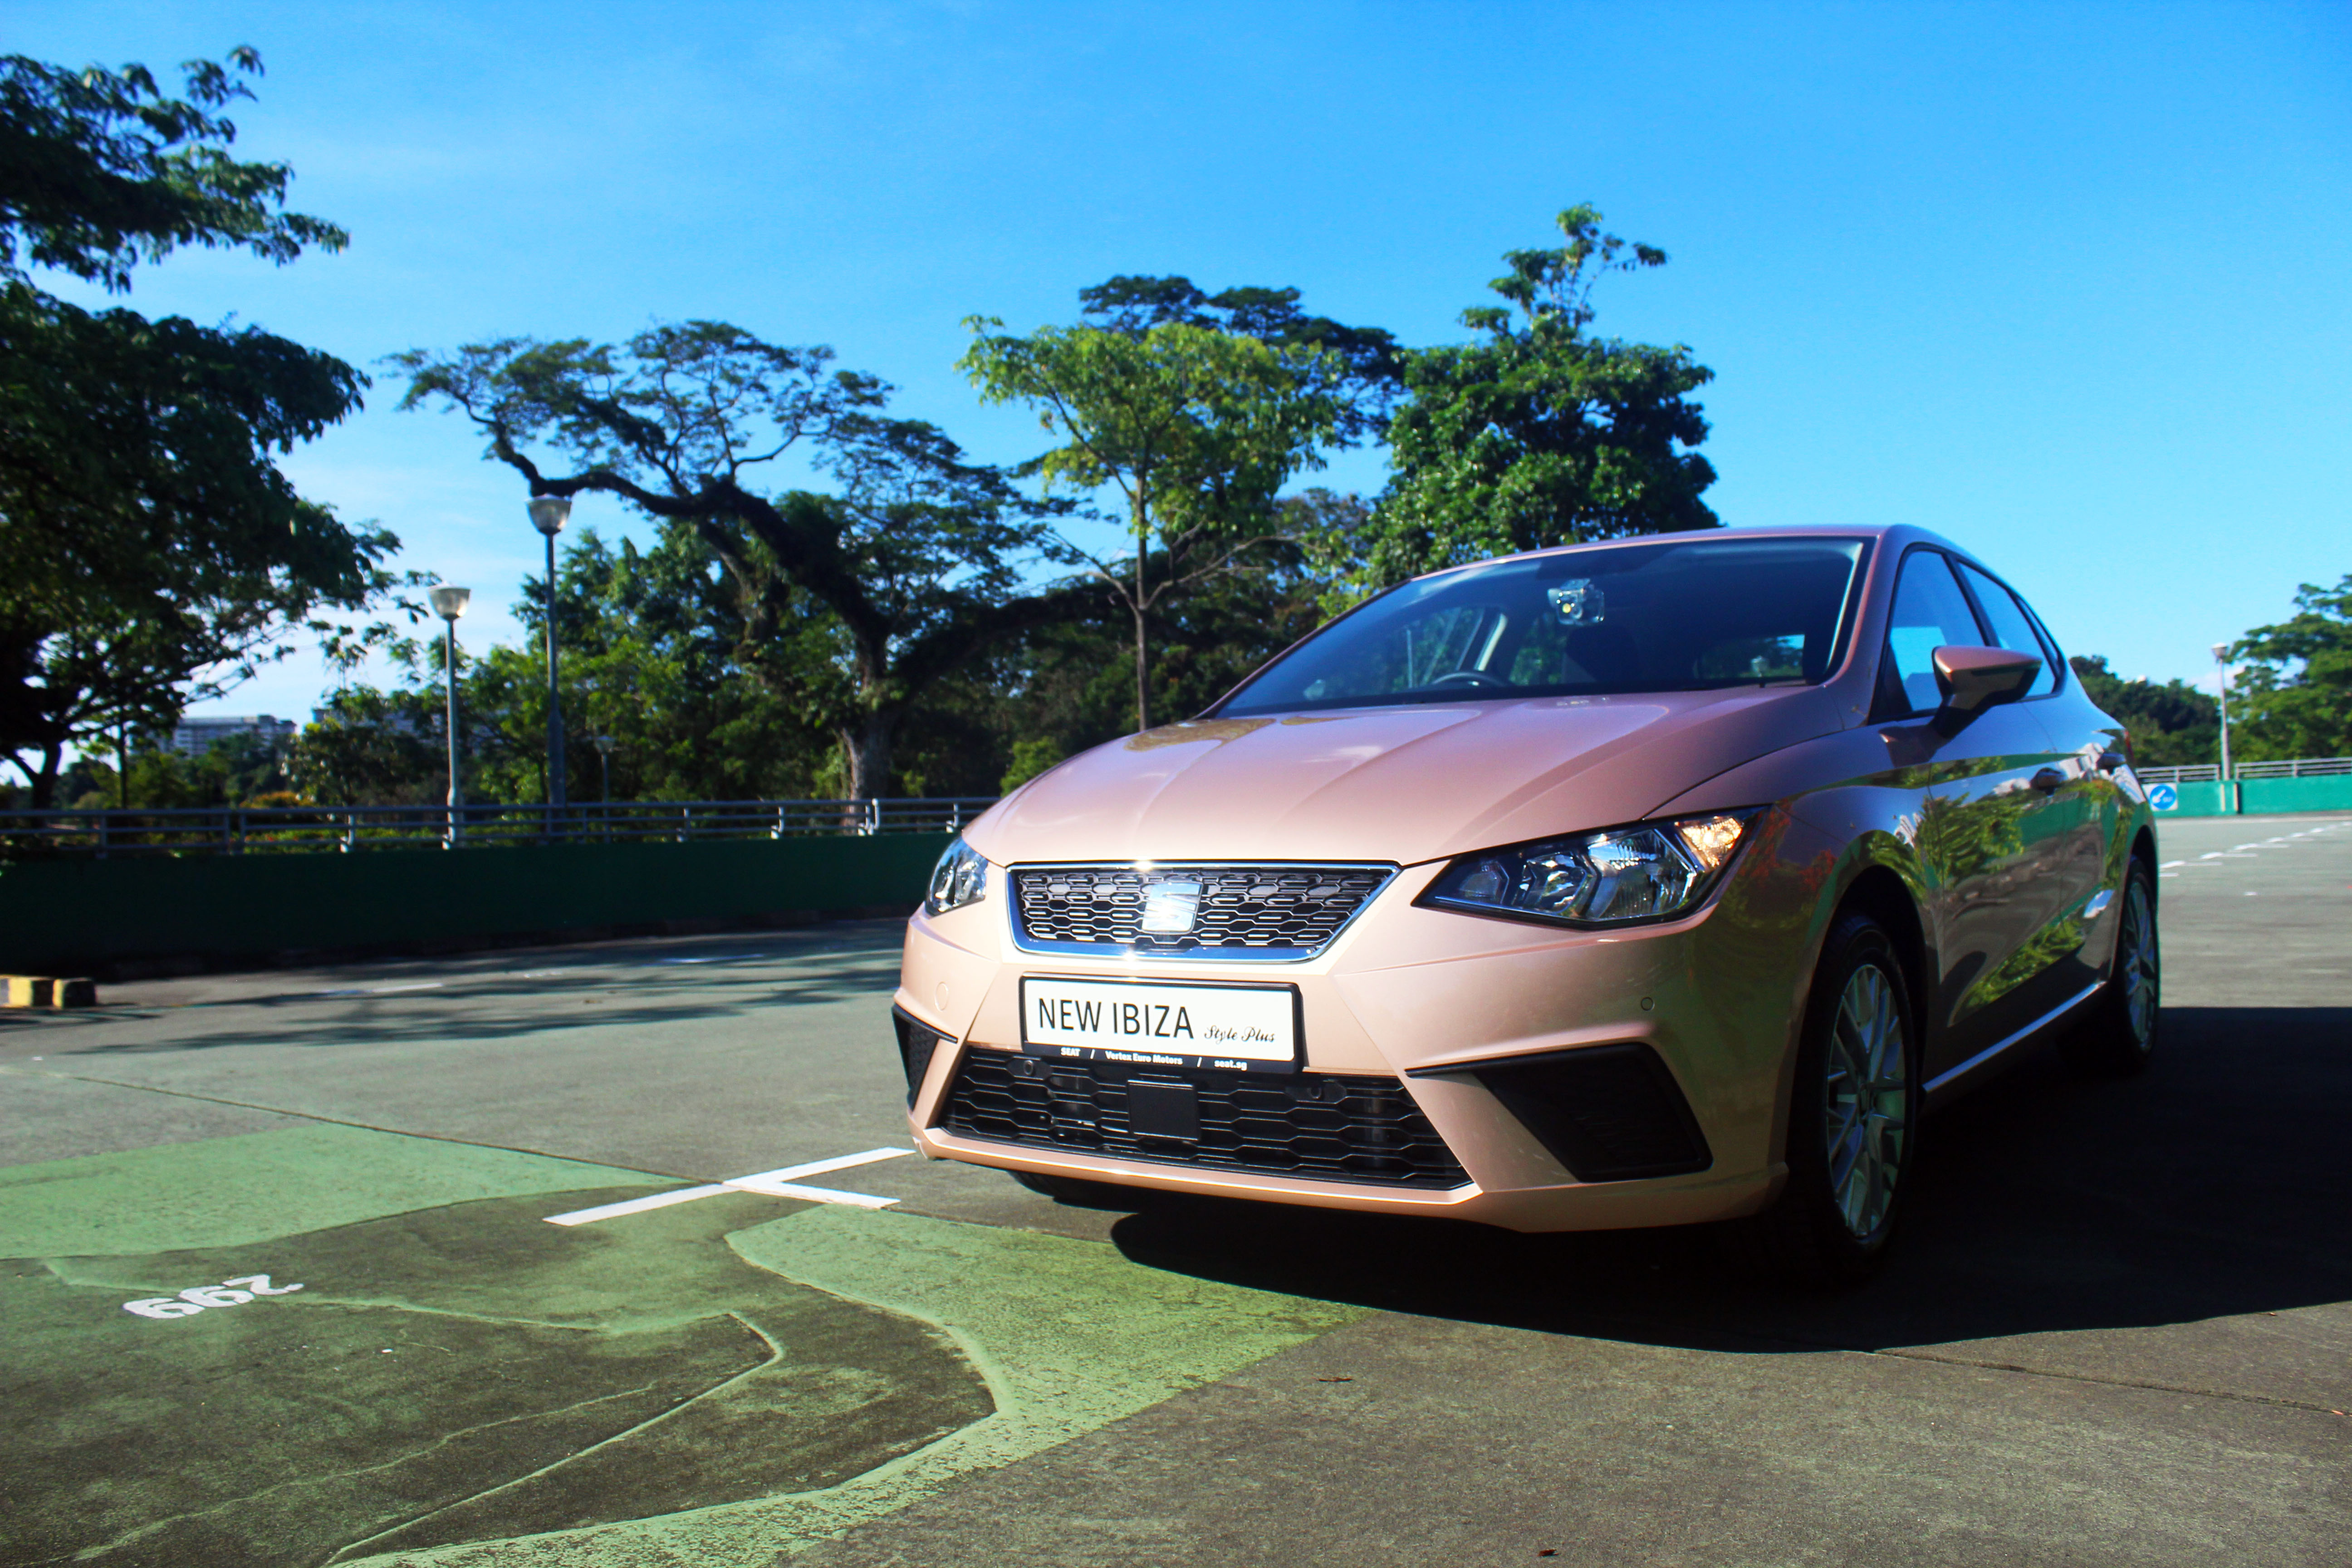 New Seat Ibiza has a sharp and angular body that makes it look very handsome